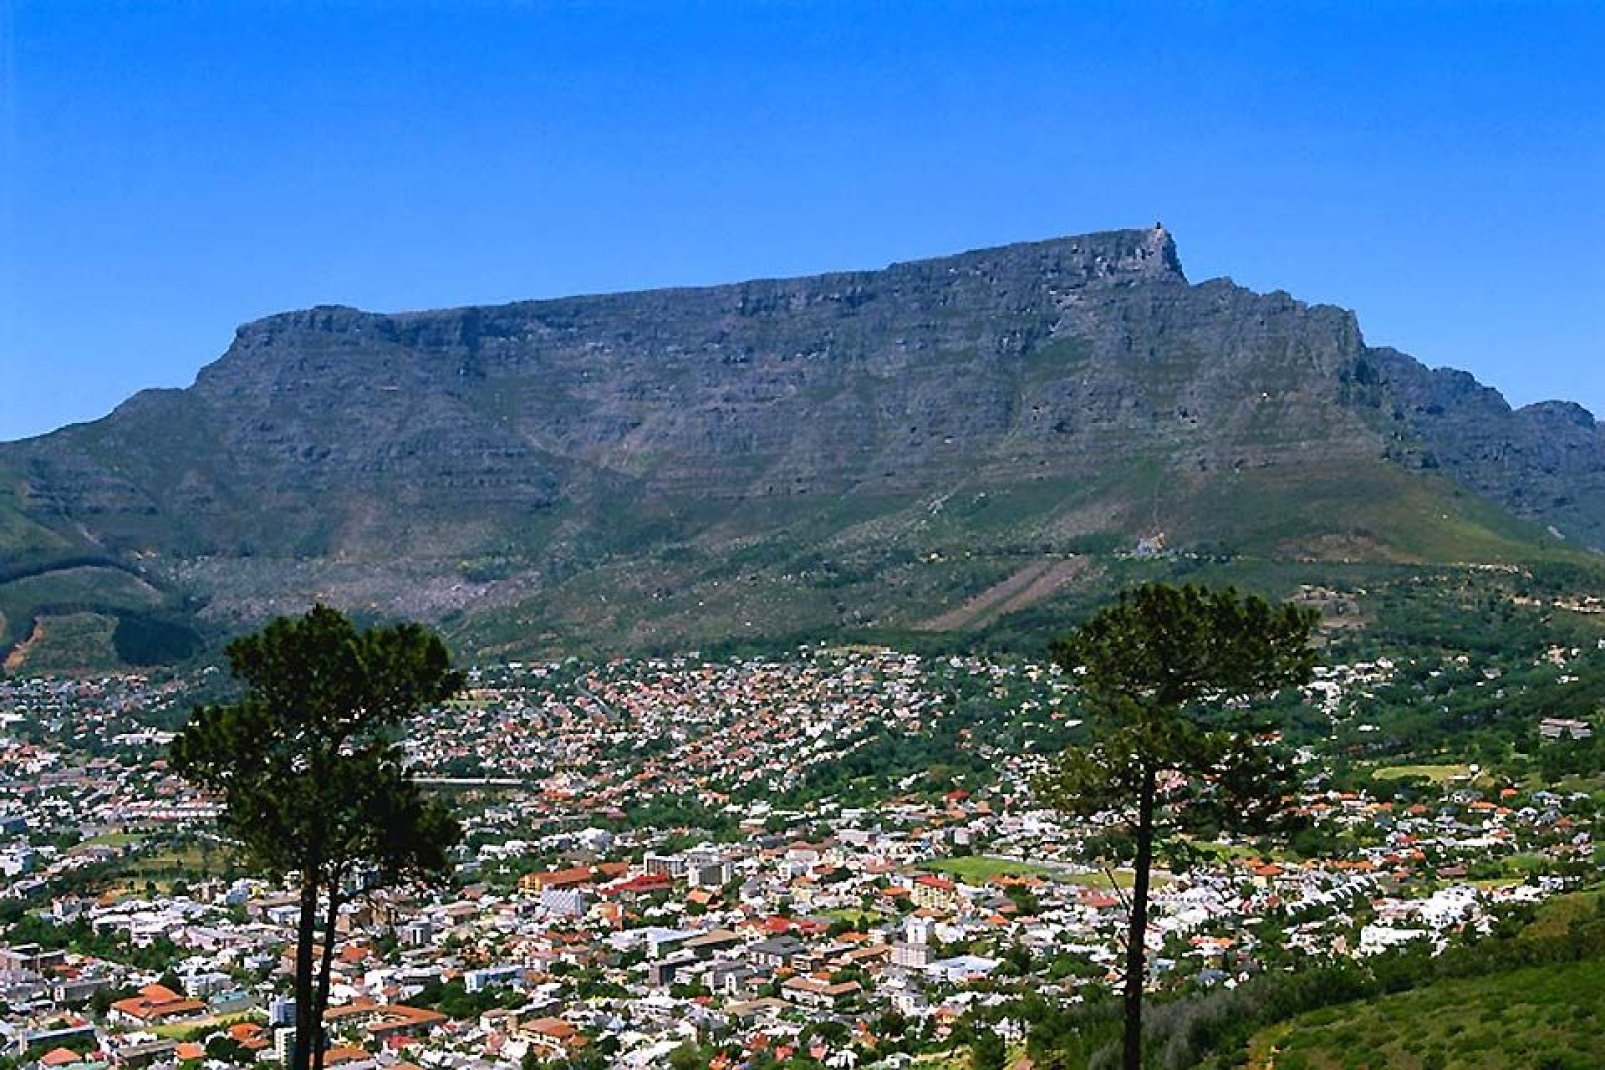 This mountain in the Western Cape province overlooks the city, and is flanked by three other peaks: Lion's Head and Signal Hill to the left, and Devil's Peak to the right.